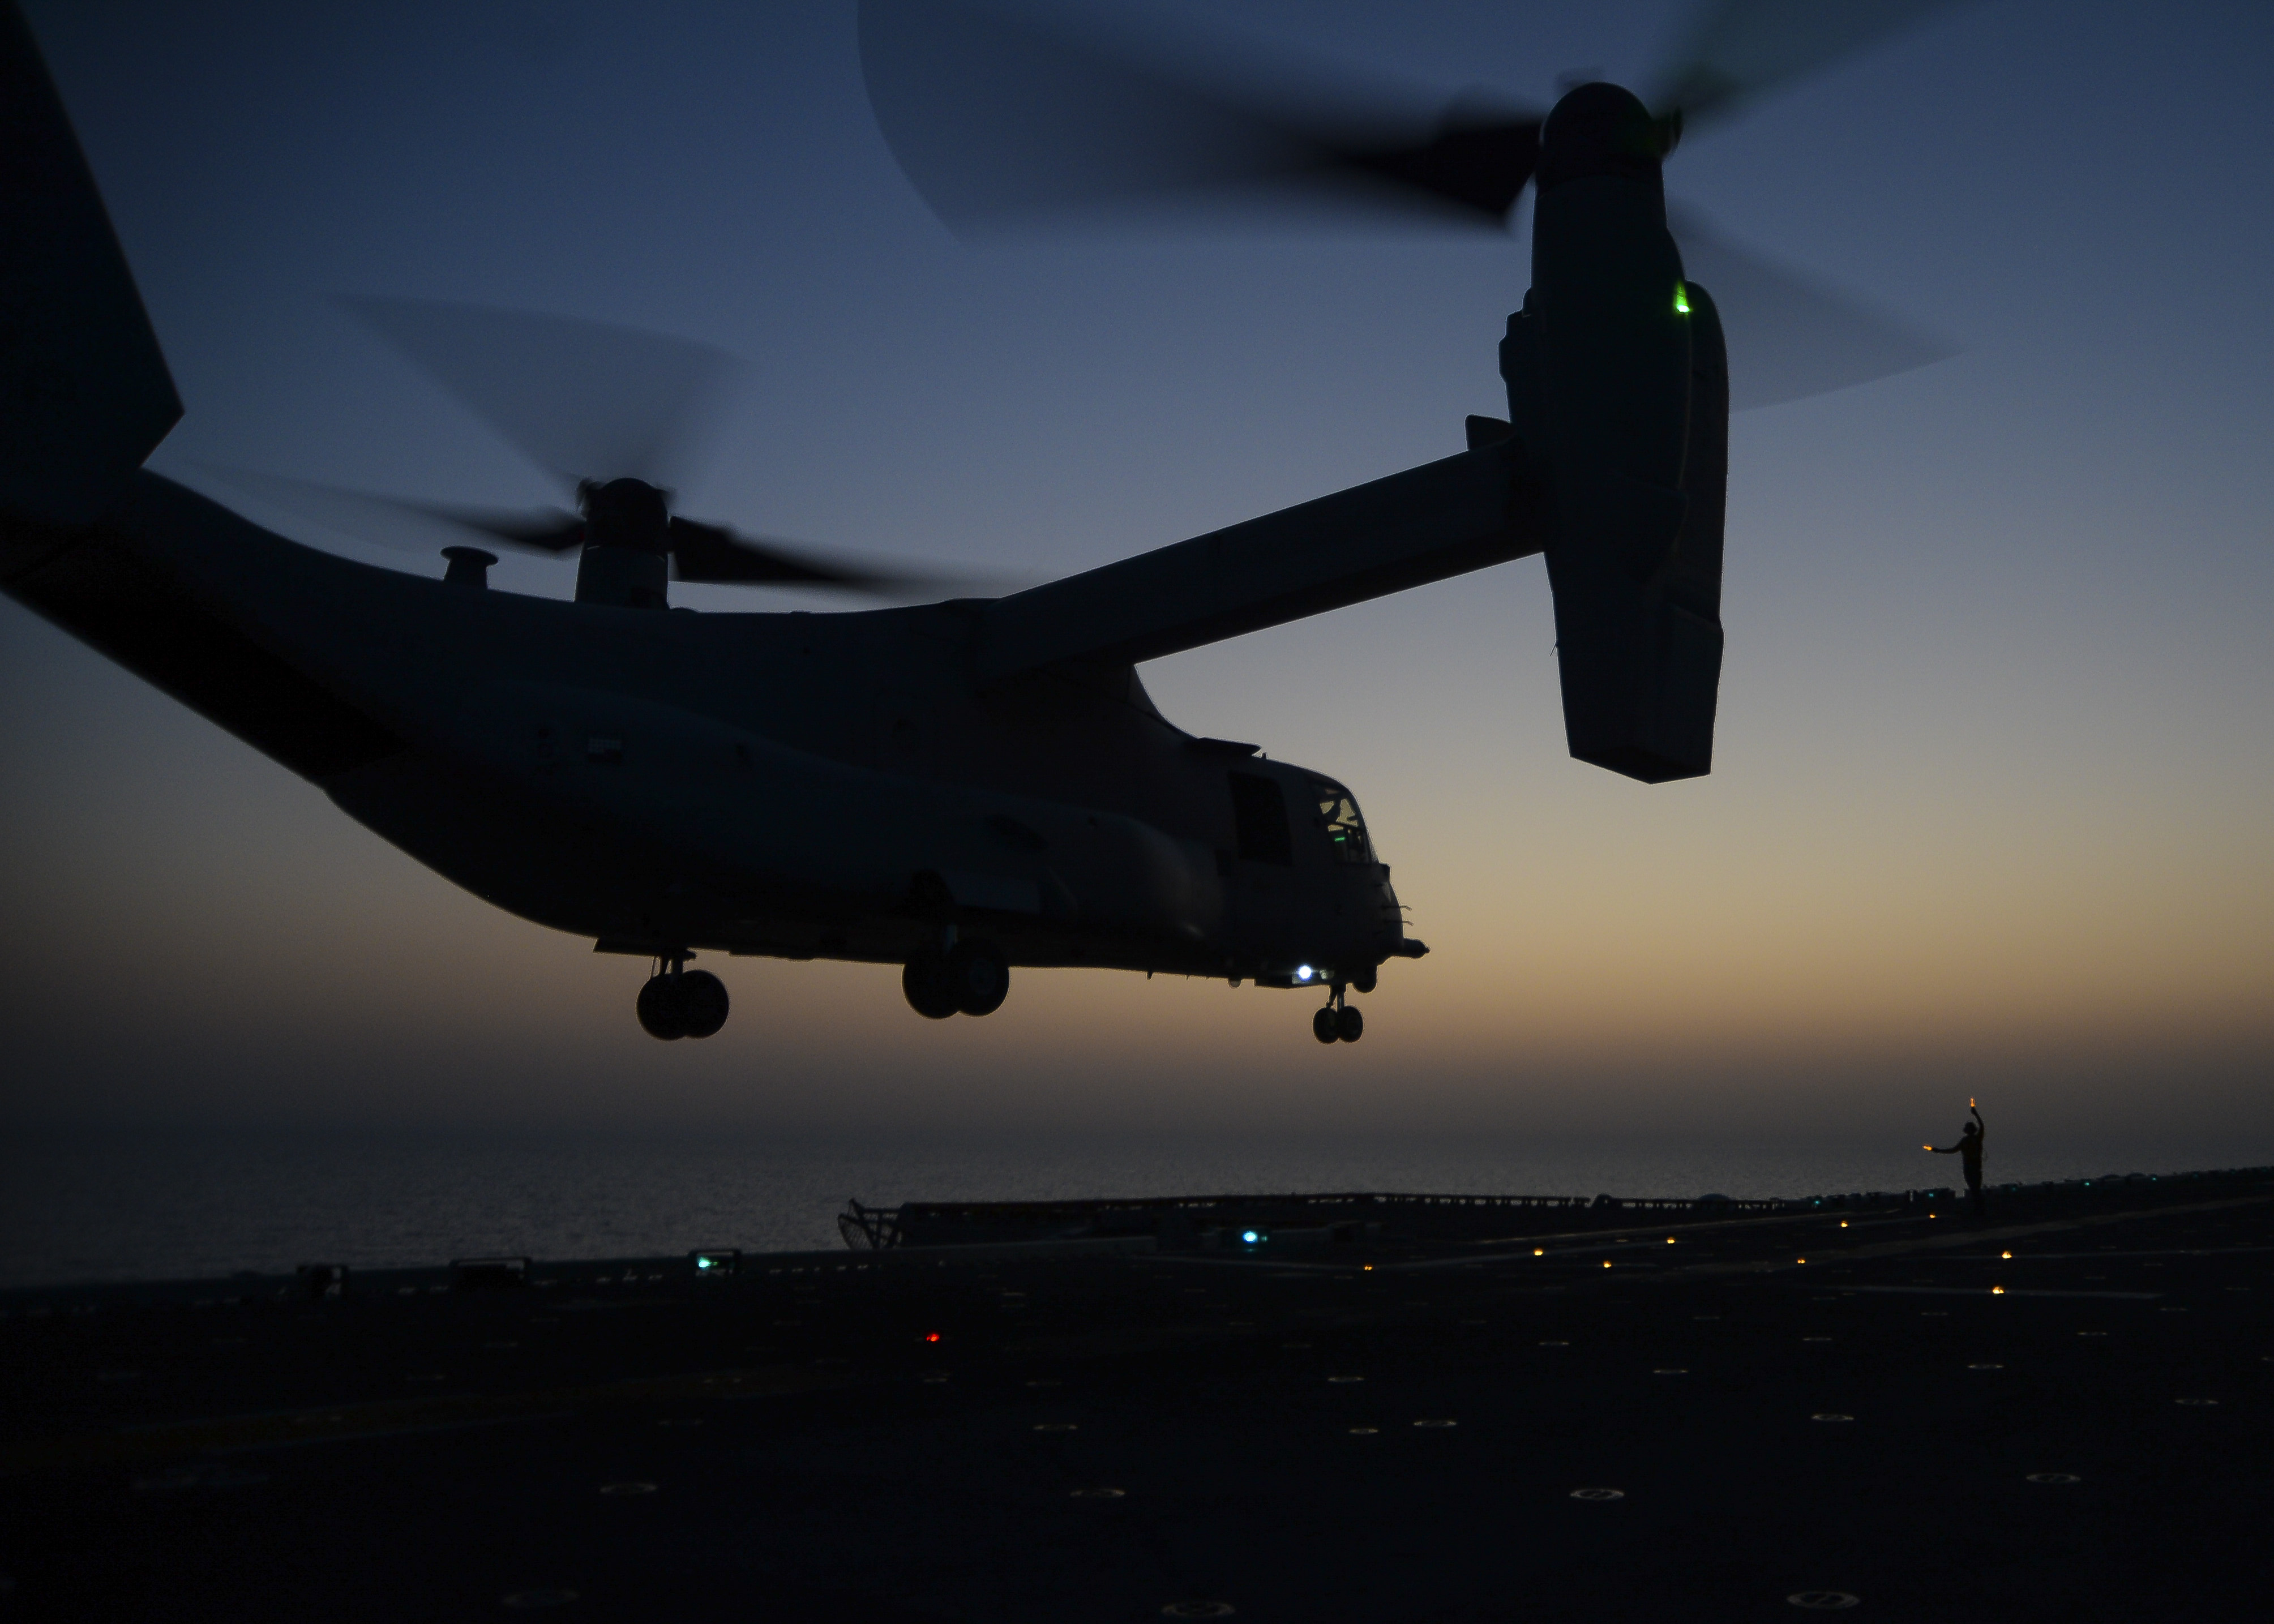 A V-22 lifts off from the USS Makin Island near Yemen in October 2014, just as SEALs did early Saturday in their effort to rescue U.S. hostage Luke Somers. (Lawrence Davis—U.S. Navy)